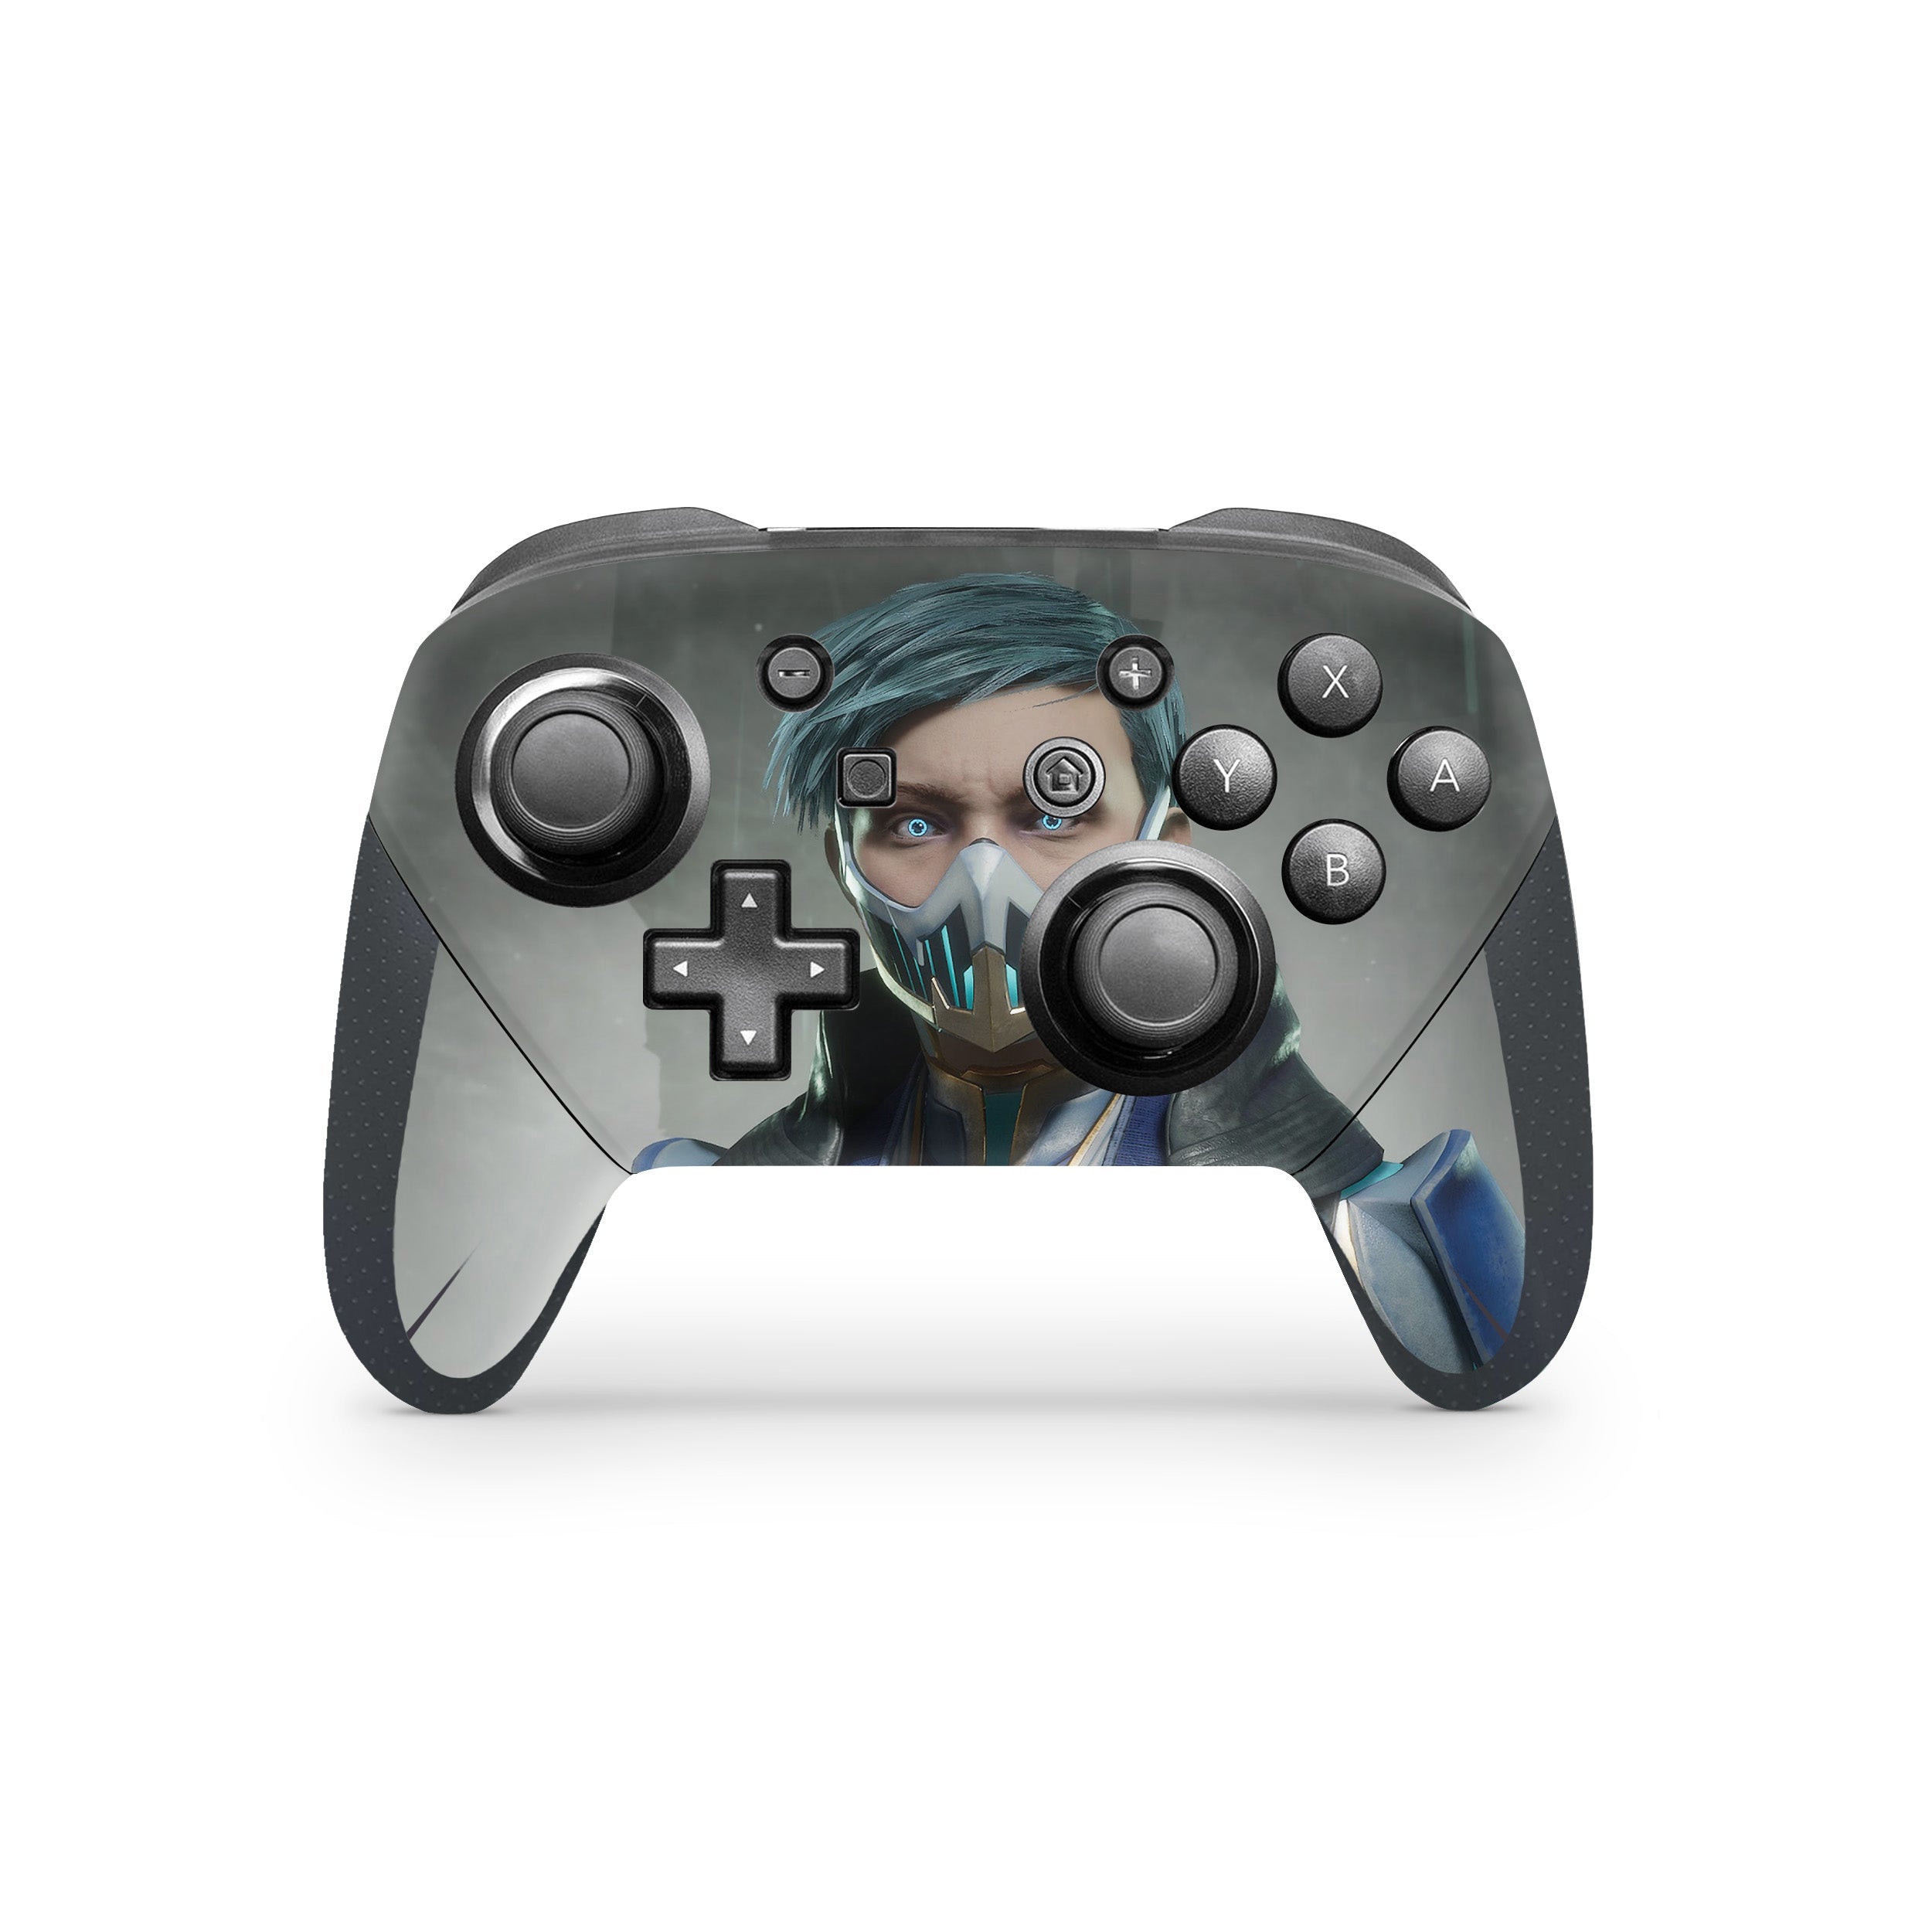 A video game skin featuring a Mortal Kombat 11 design for the Switch Pro Controller.